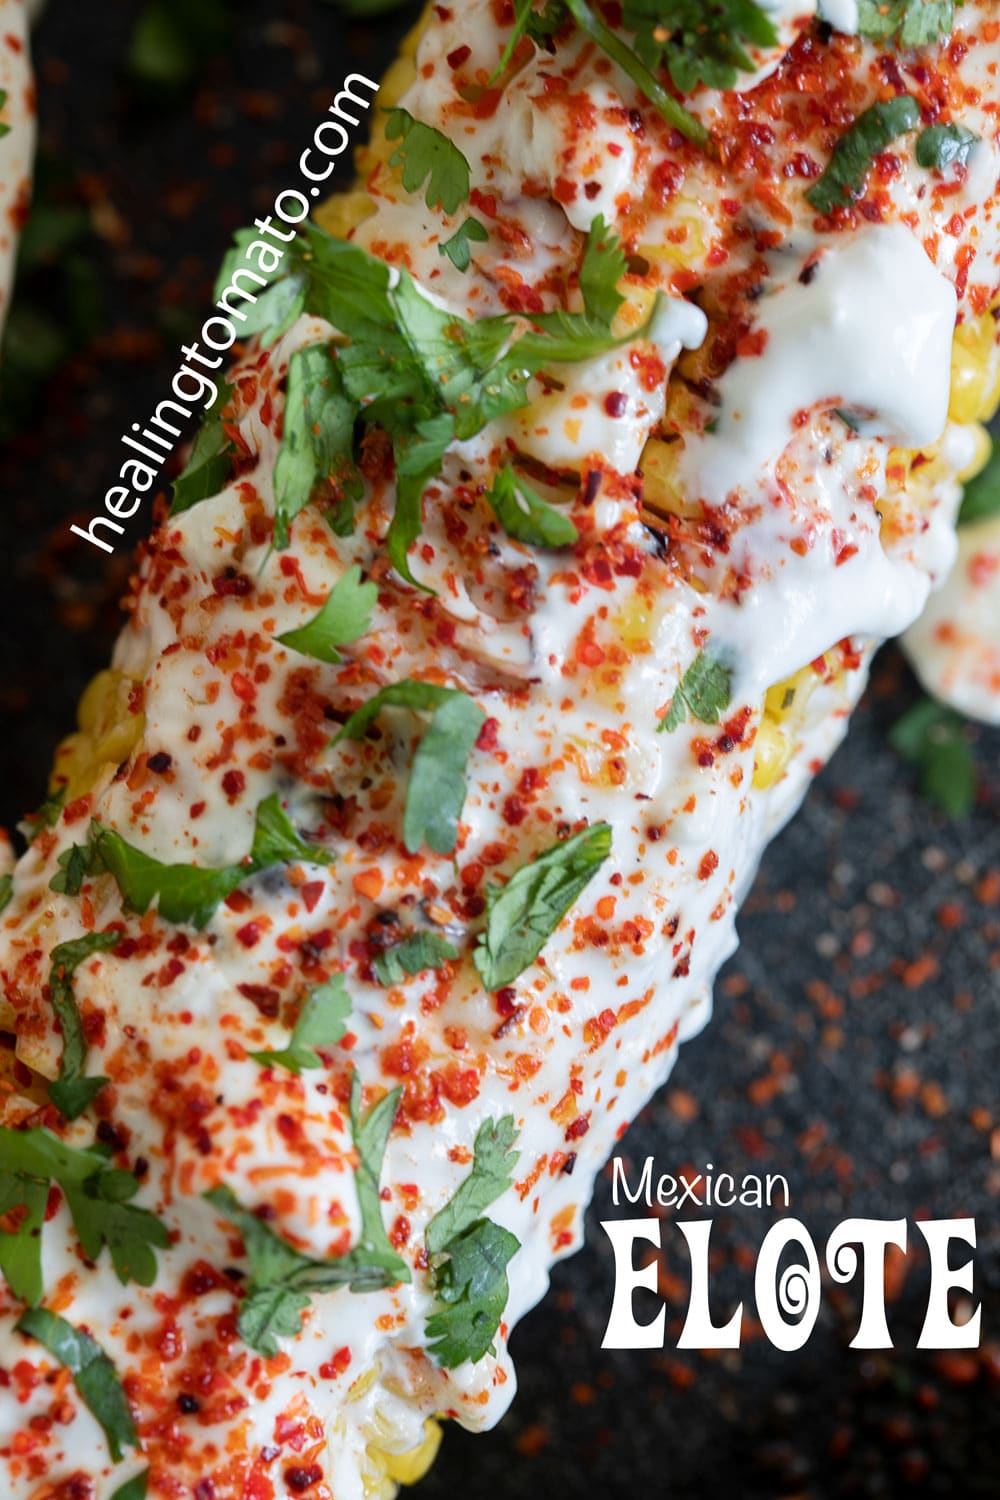 a very closeup view of one corn on the cob with a white sauce, tajin spice and garnished with cilantro